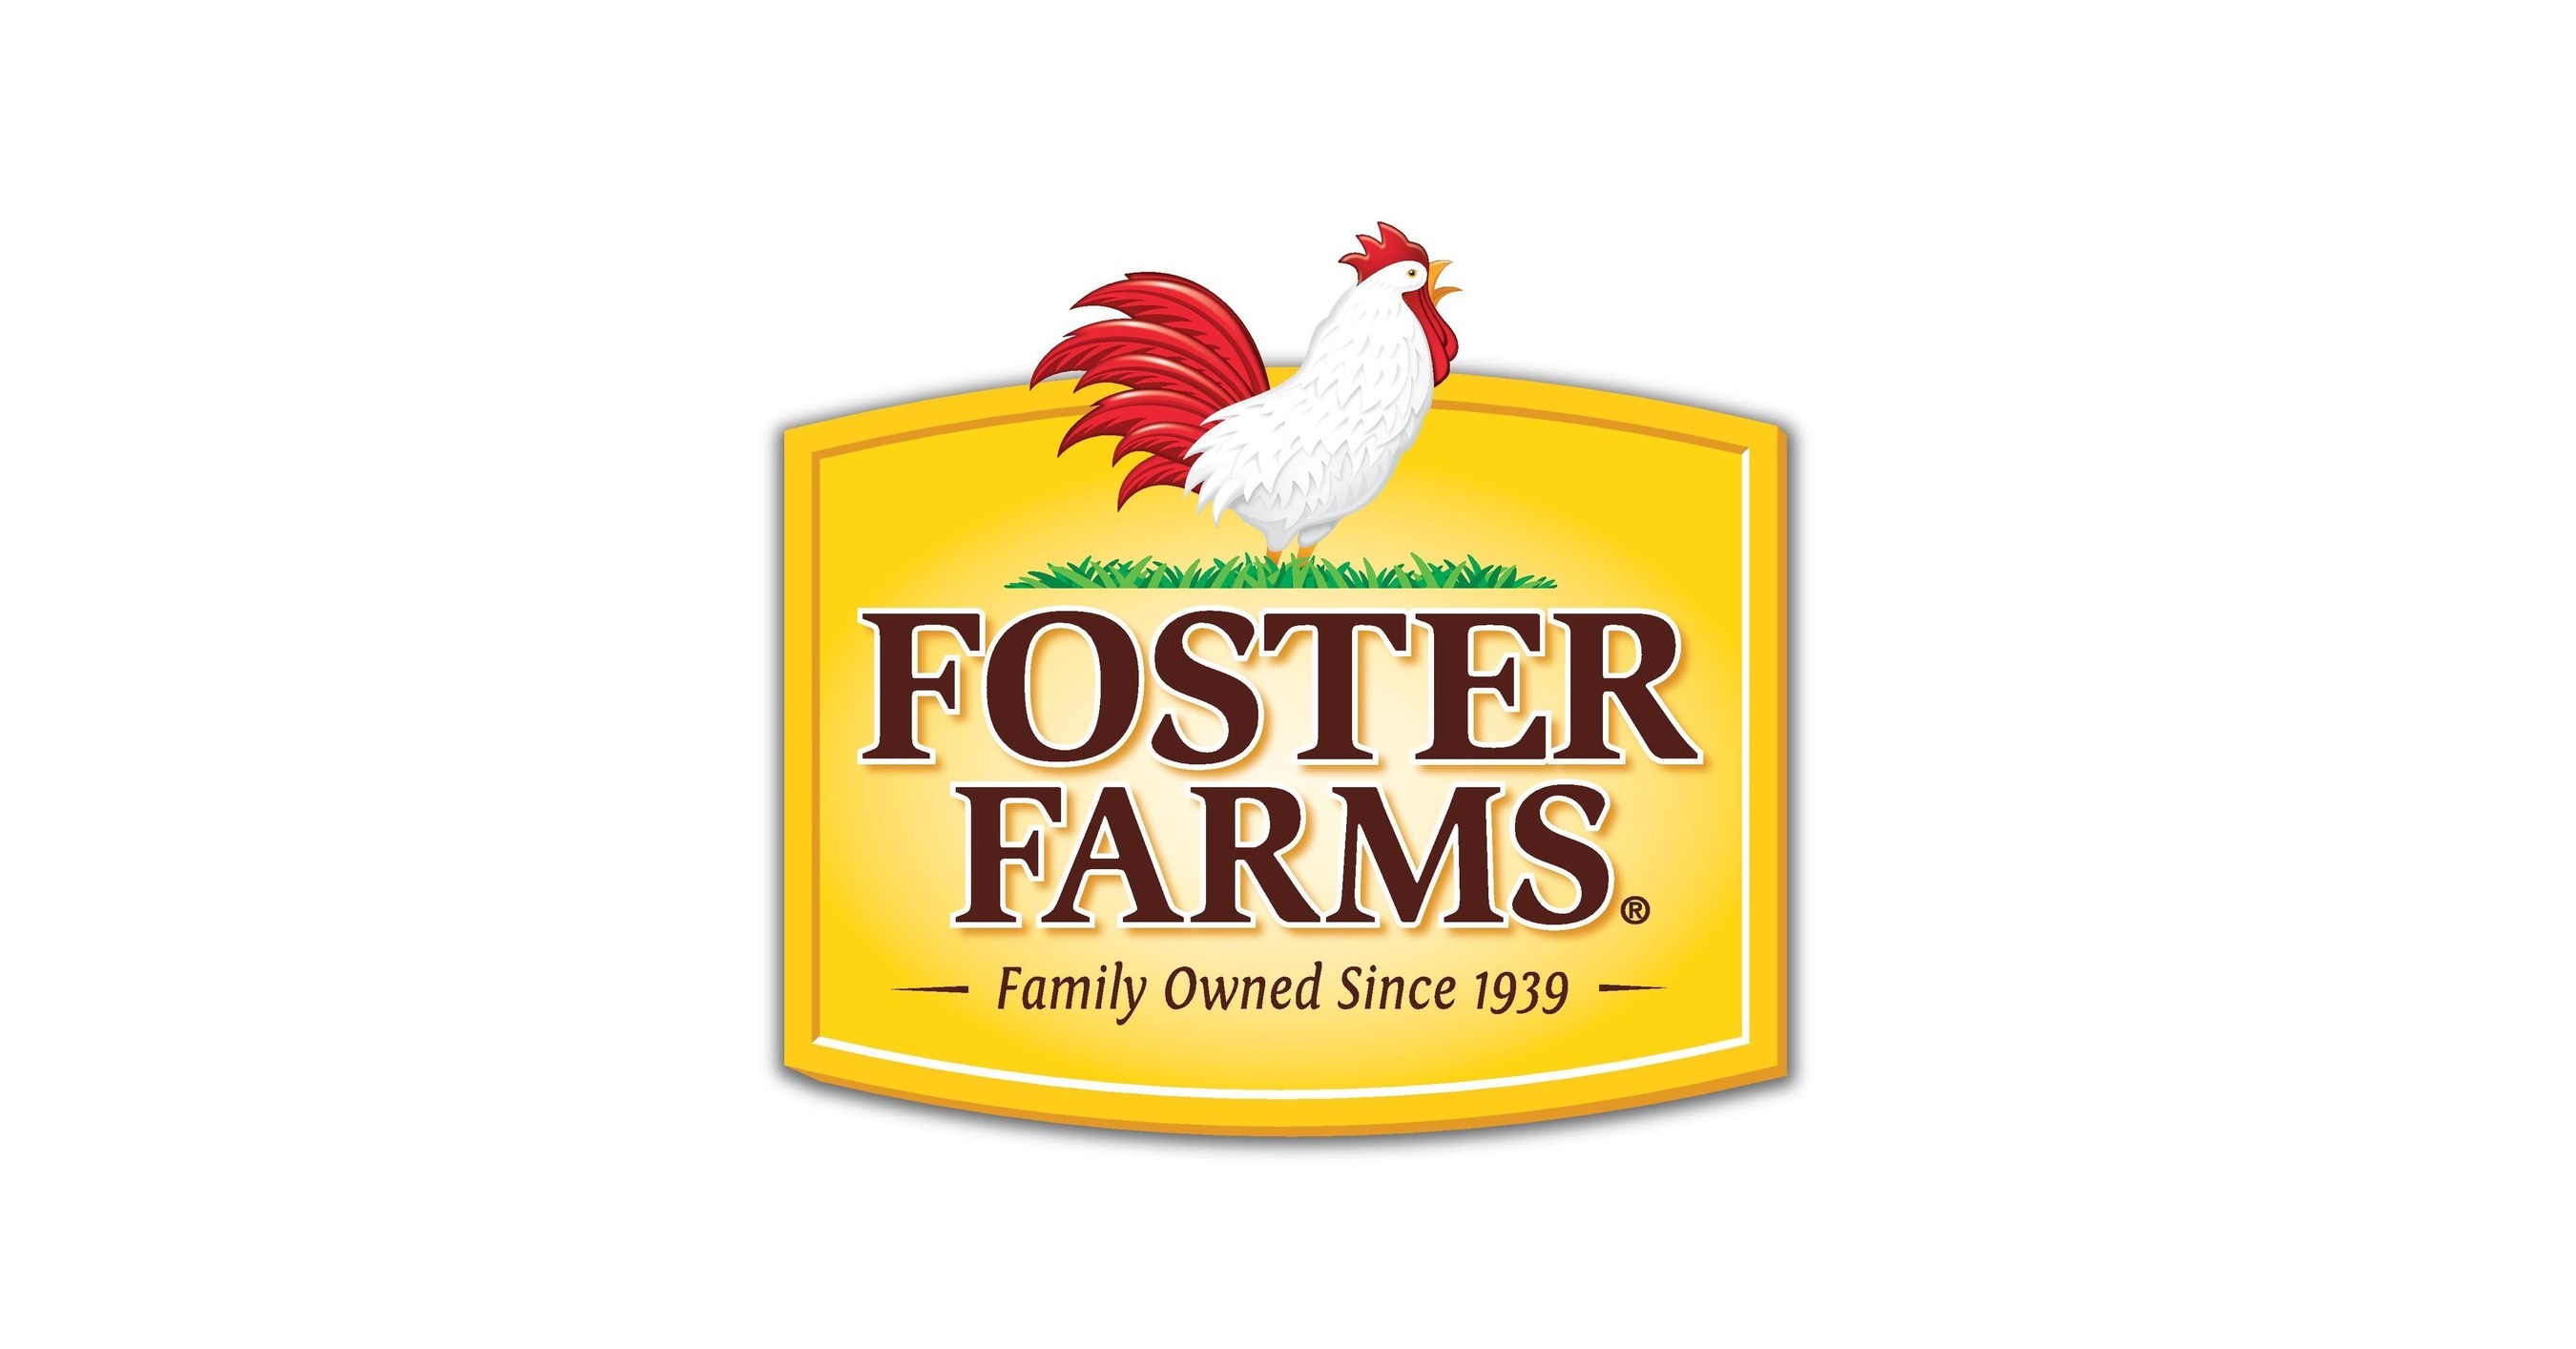 Foster Farms Donates Turkey To Serve 140,000 Holiday Meals To West